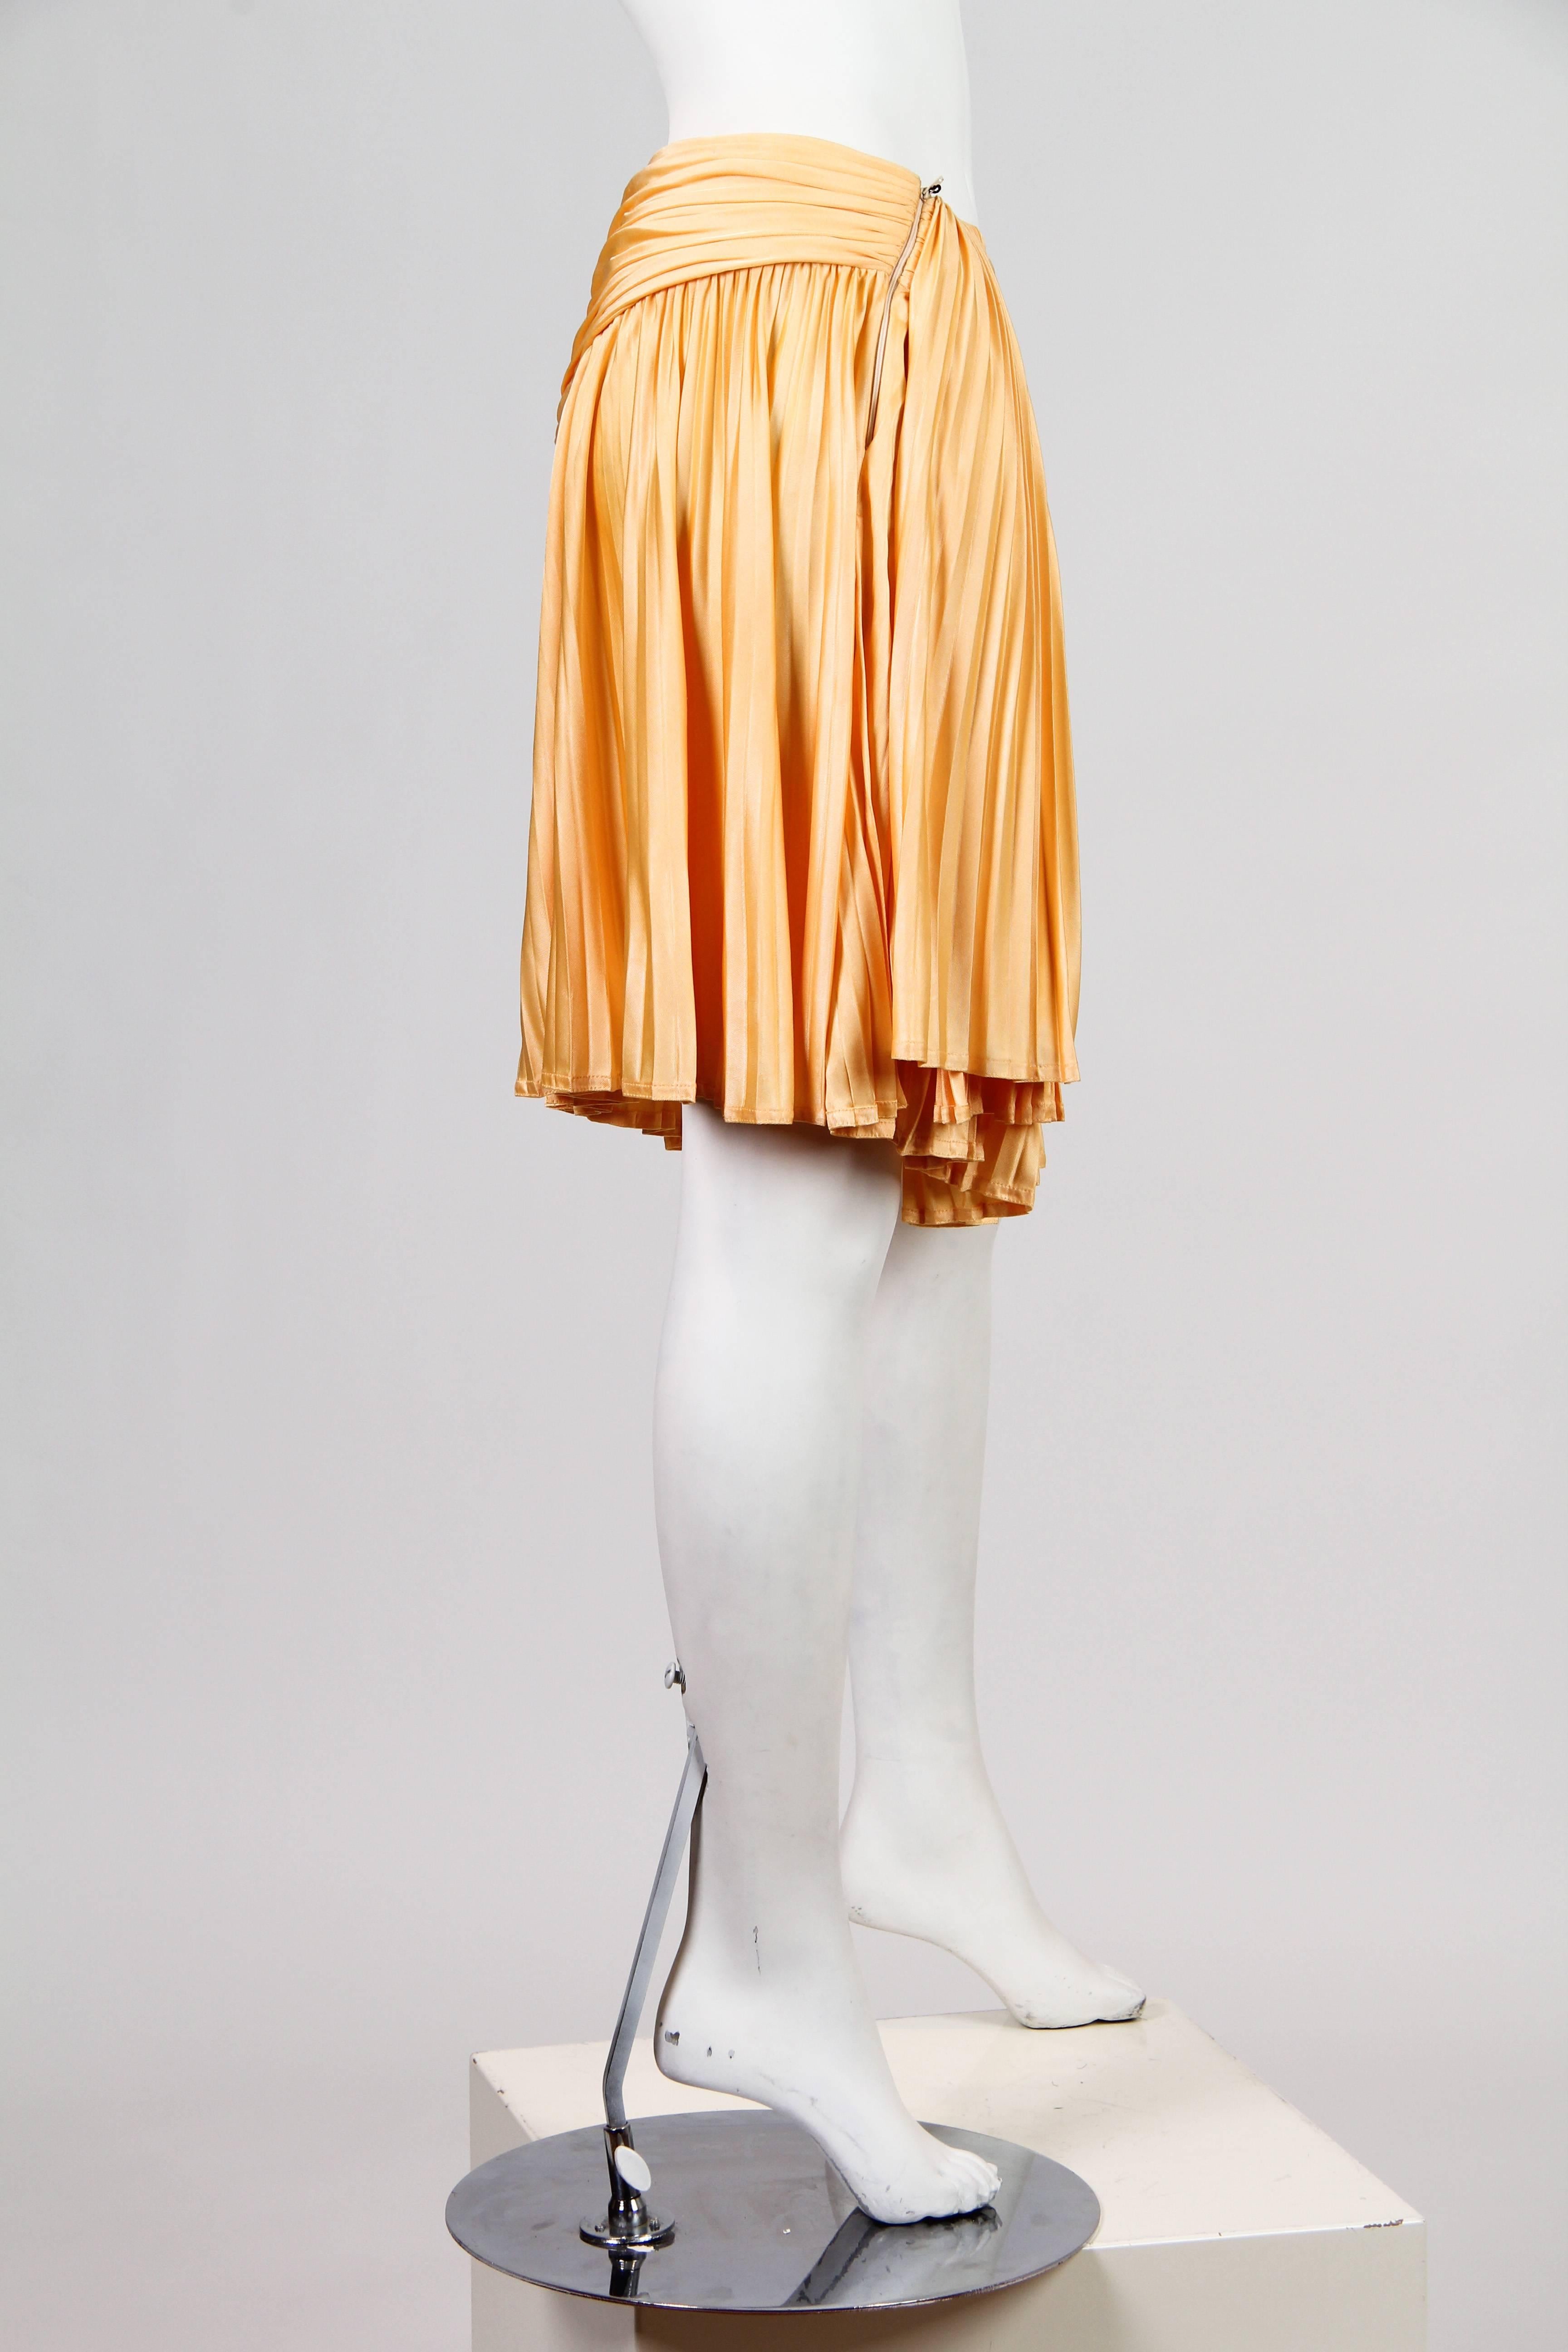 1990S GIANNI VERSACE Buttercream Yellow Rayon Jersey Mini Skirt With Slit In Excellent Condition For Sale In New York, NY